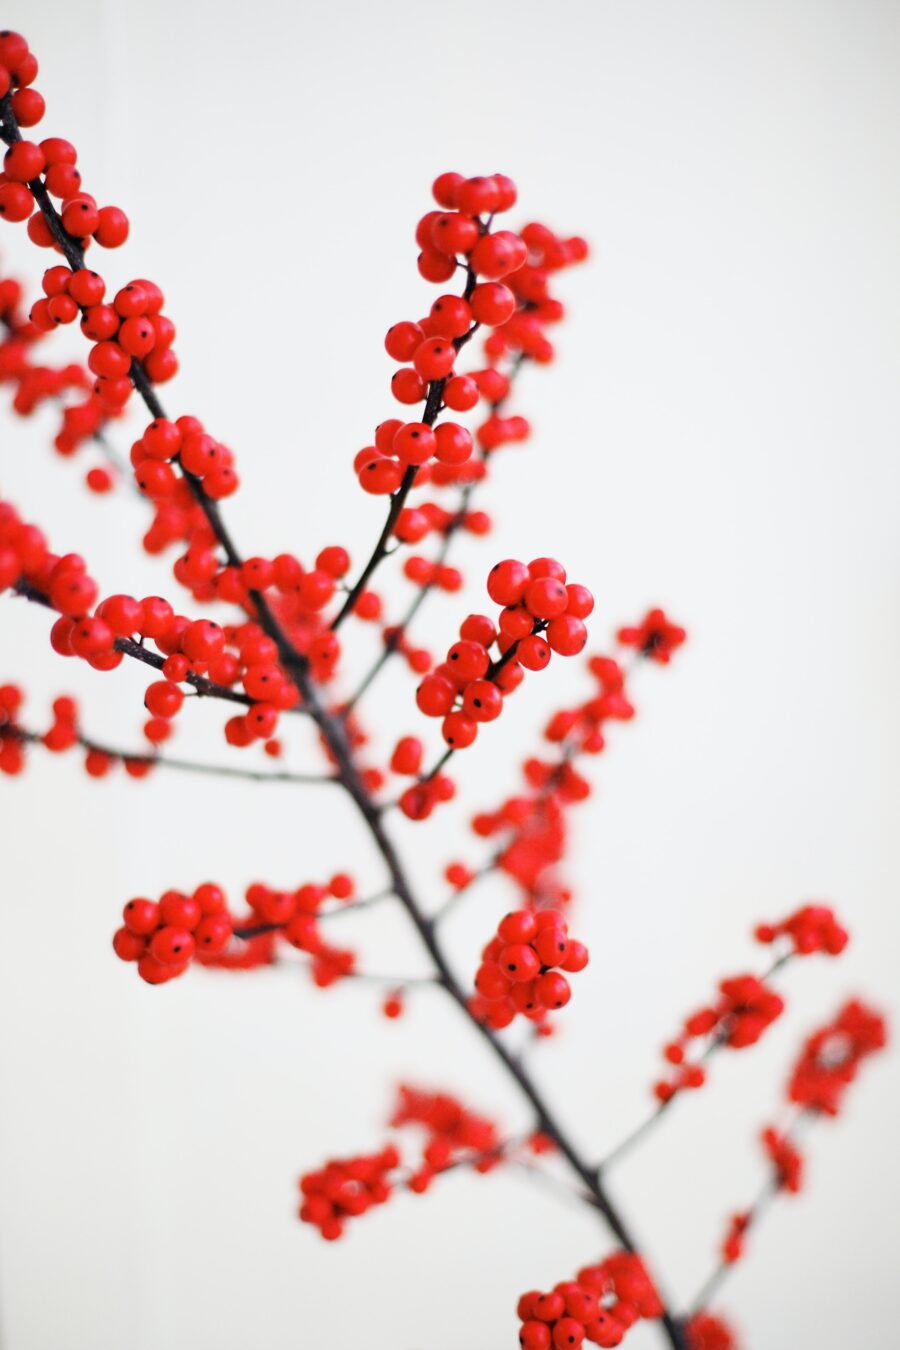 Close up photo of red berries growing on branches.